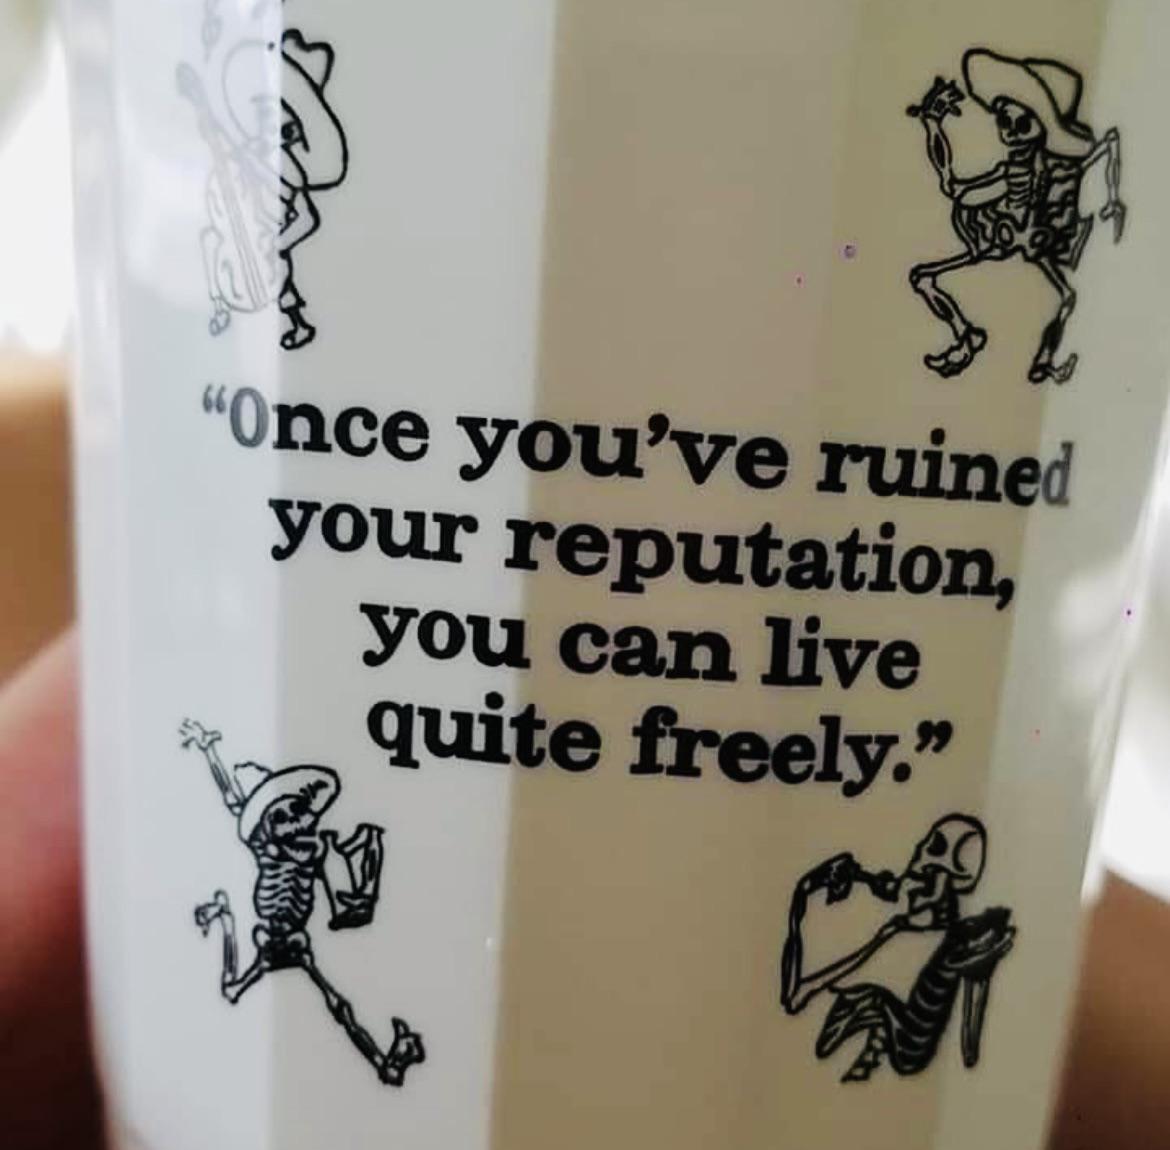 daily dose of randoms - once you ve ruined your reputation meaning - Tana "Once you've ruined your reputation, you can live quite freely."